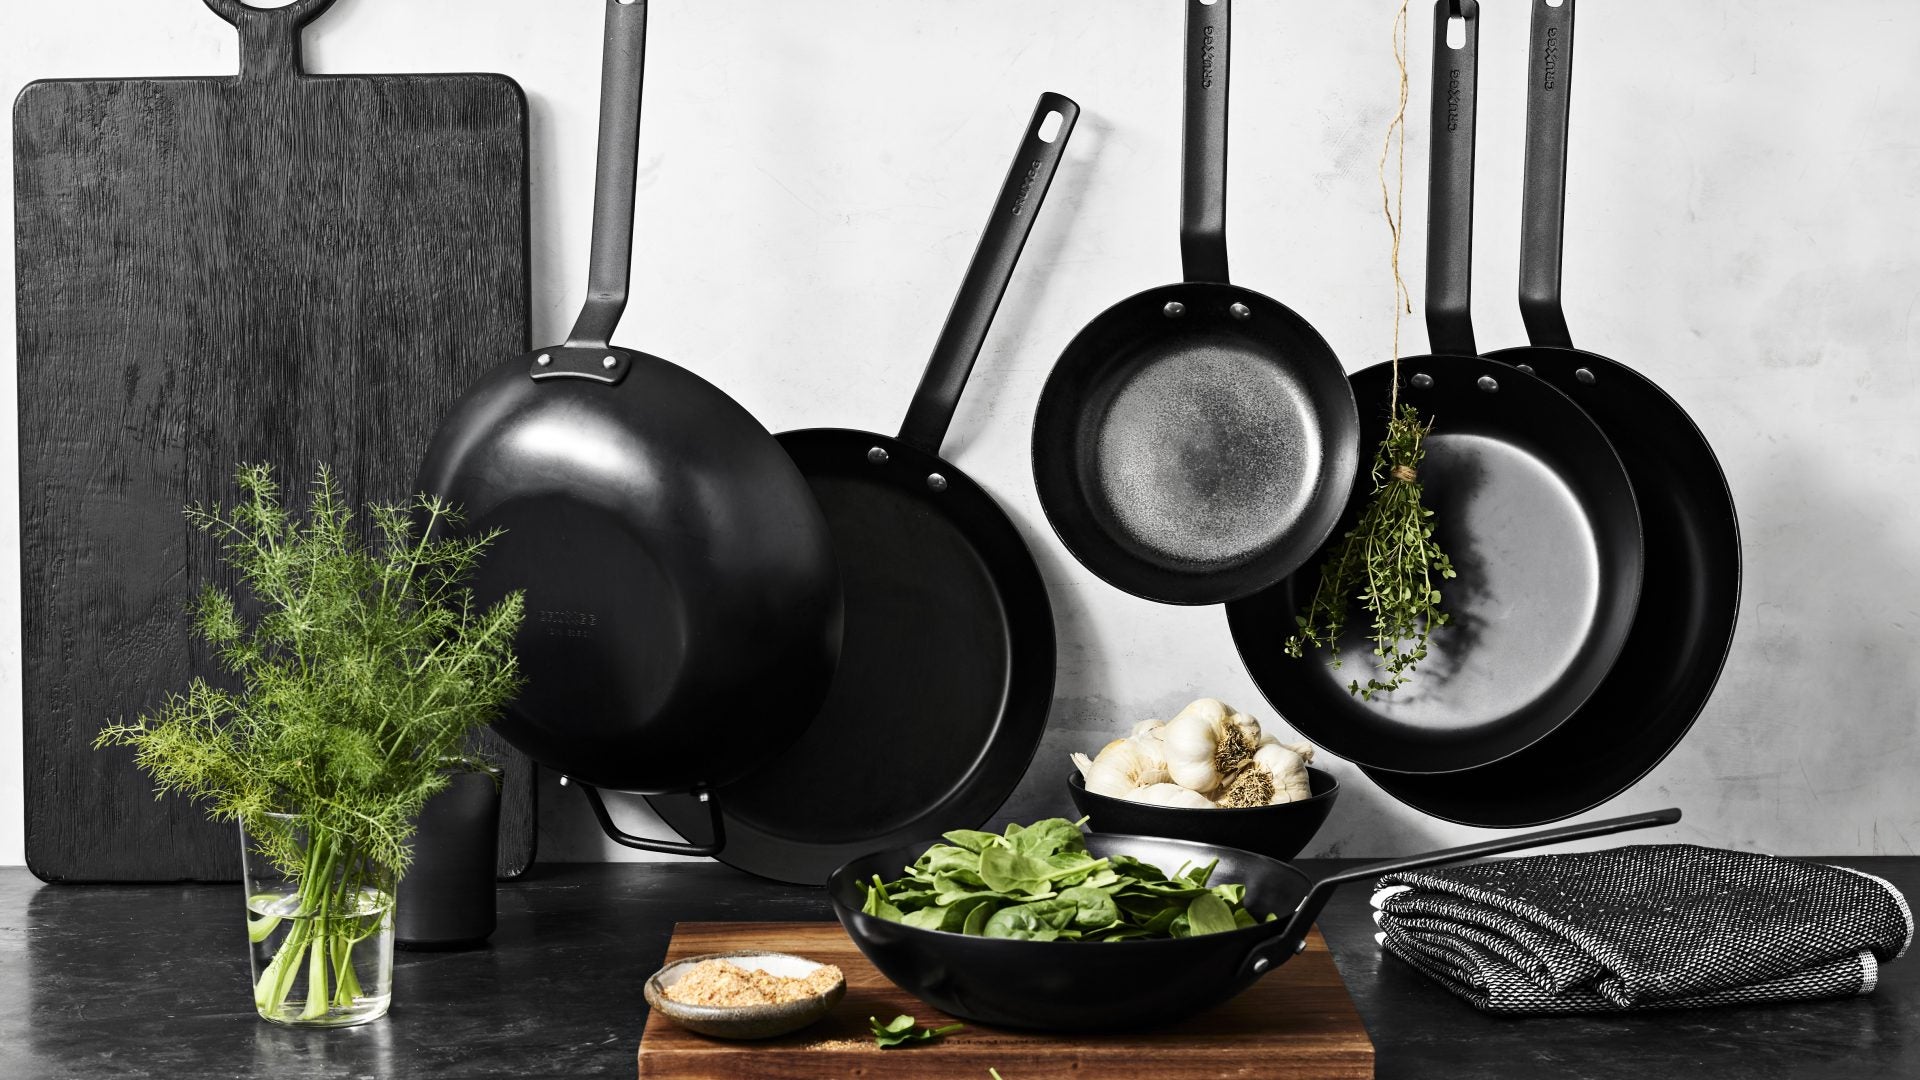 Ghetto Gastro And Williams Sonoma Partner On Sleek All-Black Cookware Line